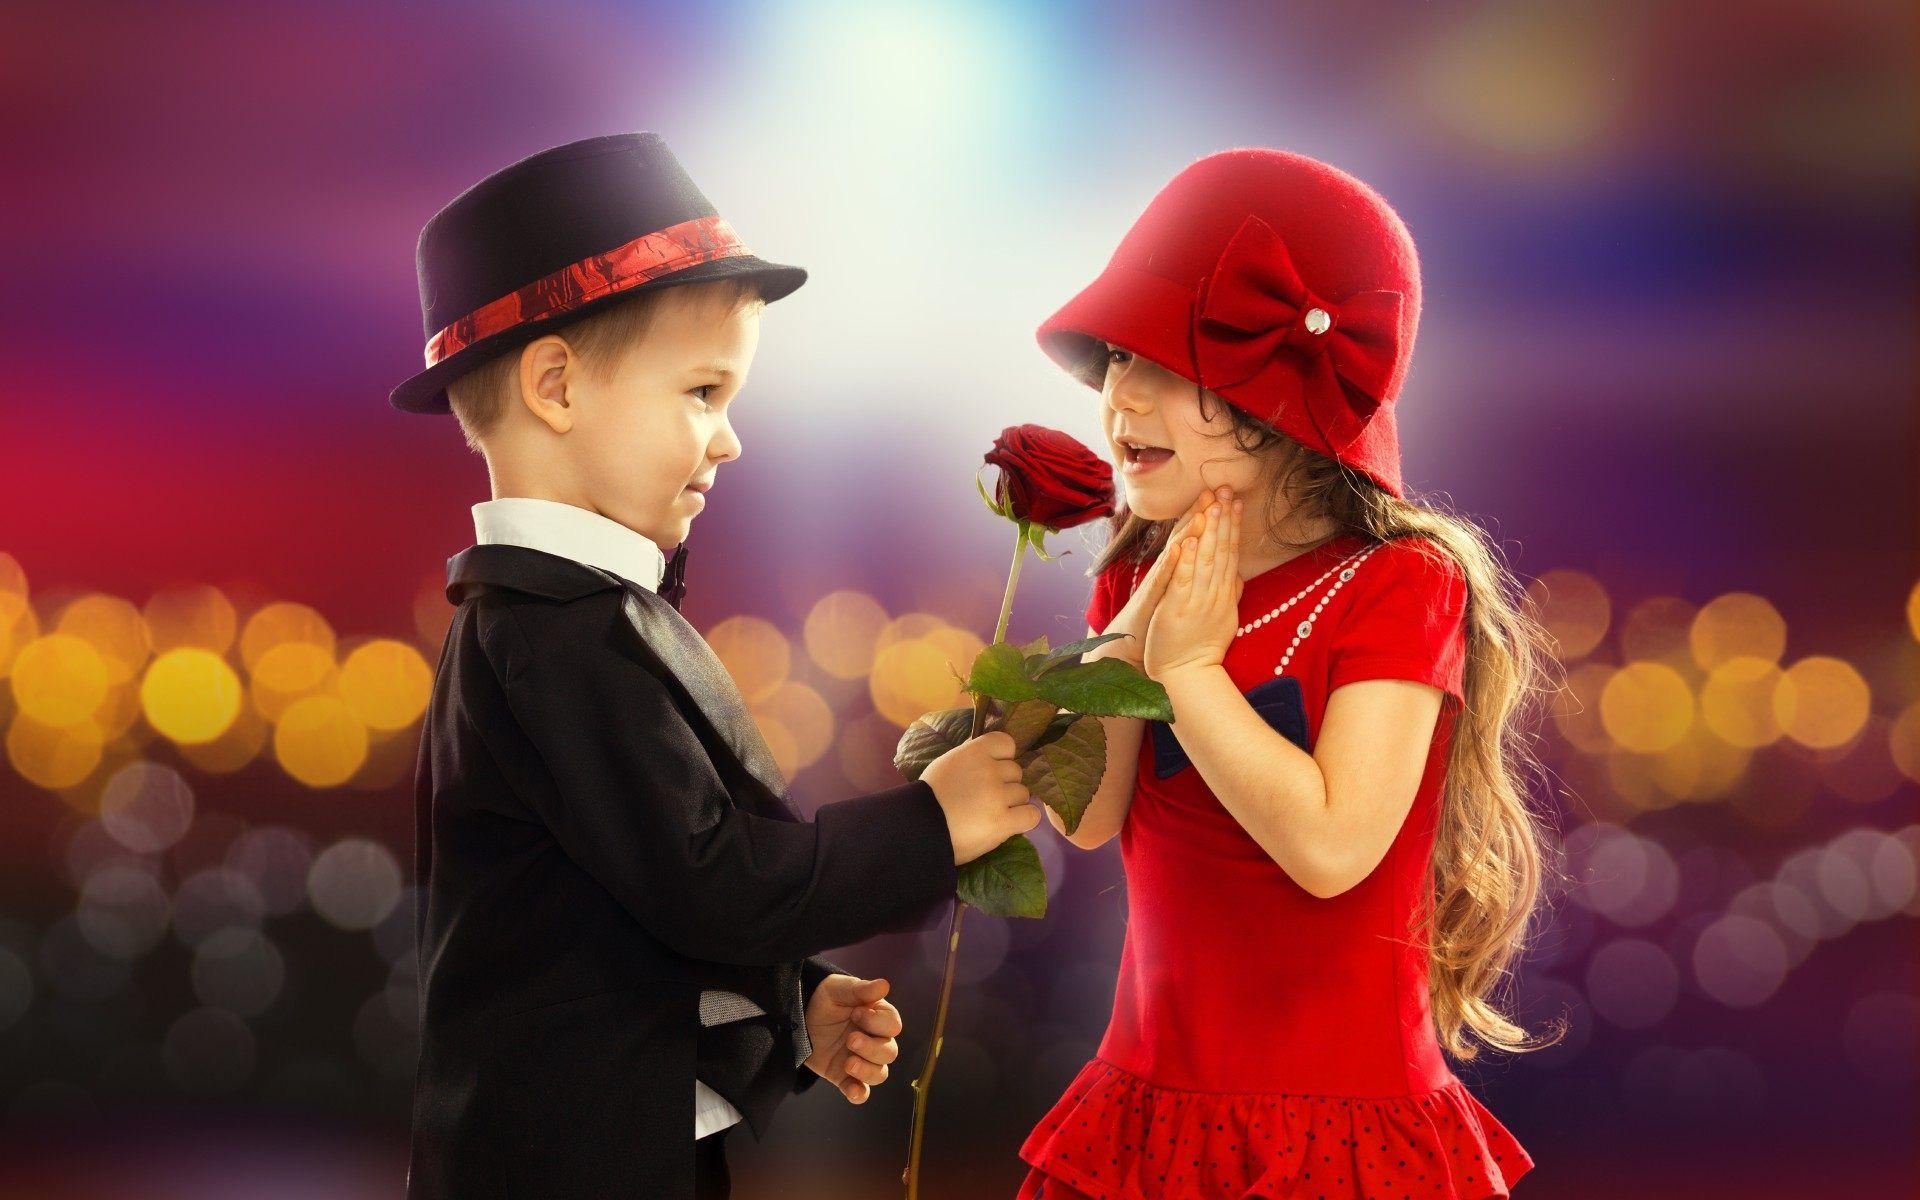 Cute Love Baby Couple Wallpapers For Mobile - Wallpaper Cave